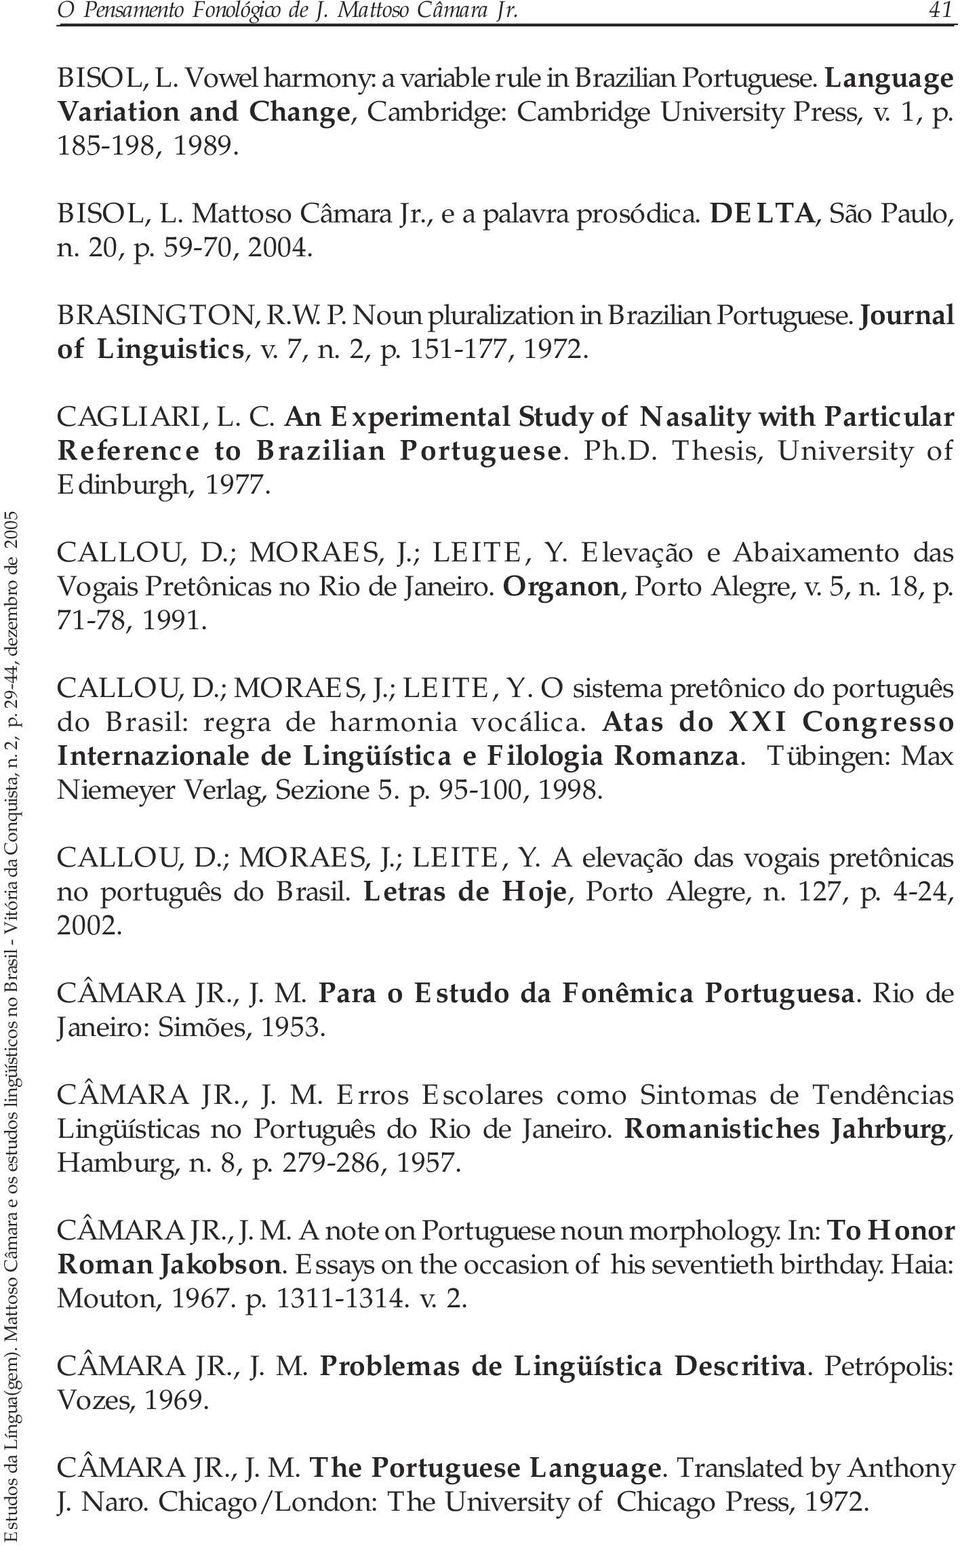 7, n. 2, p. 151-177, 1972. CAGLIARI, L. C. An Experimental Study of Nasality with Particular Reference to Brazilian Portuguese. Ph.D. Thesis, University of Edinburgh, 1977. CALLOU, D.; MORAES, J.